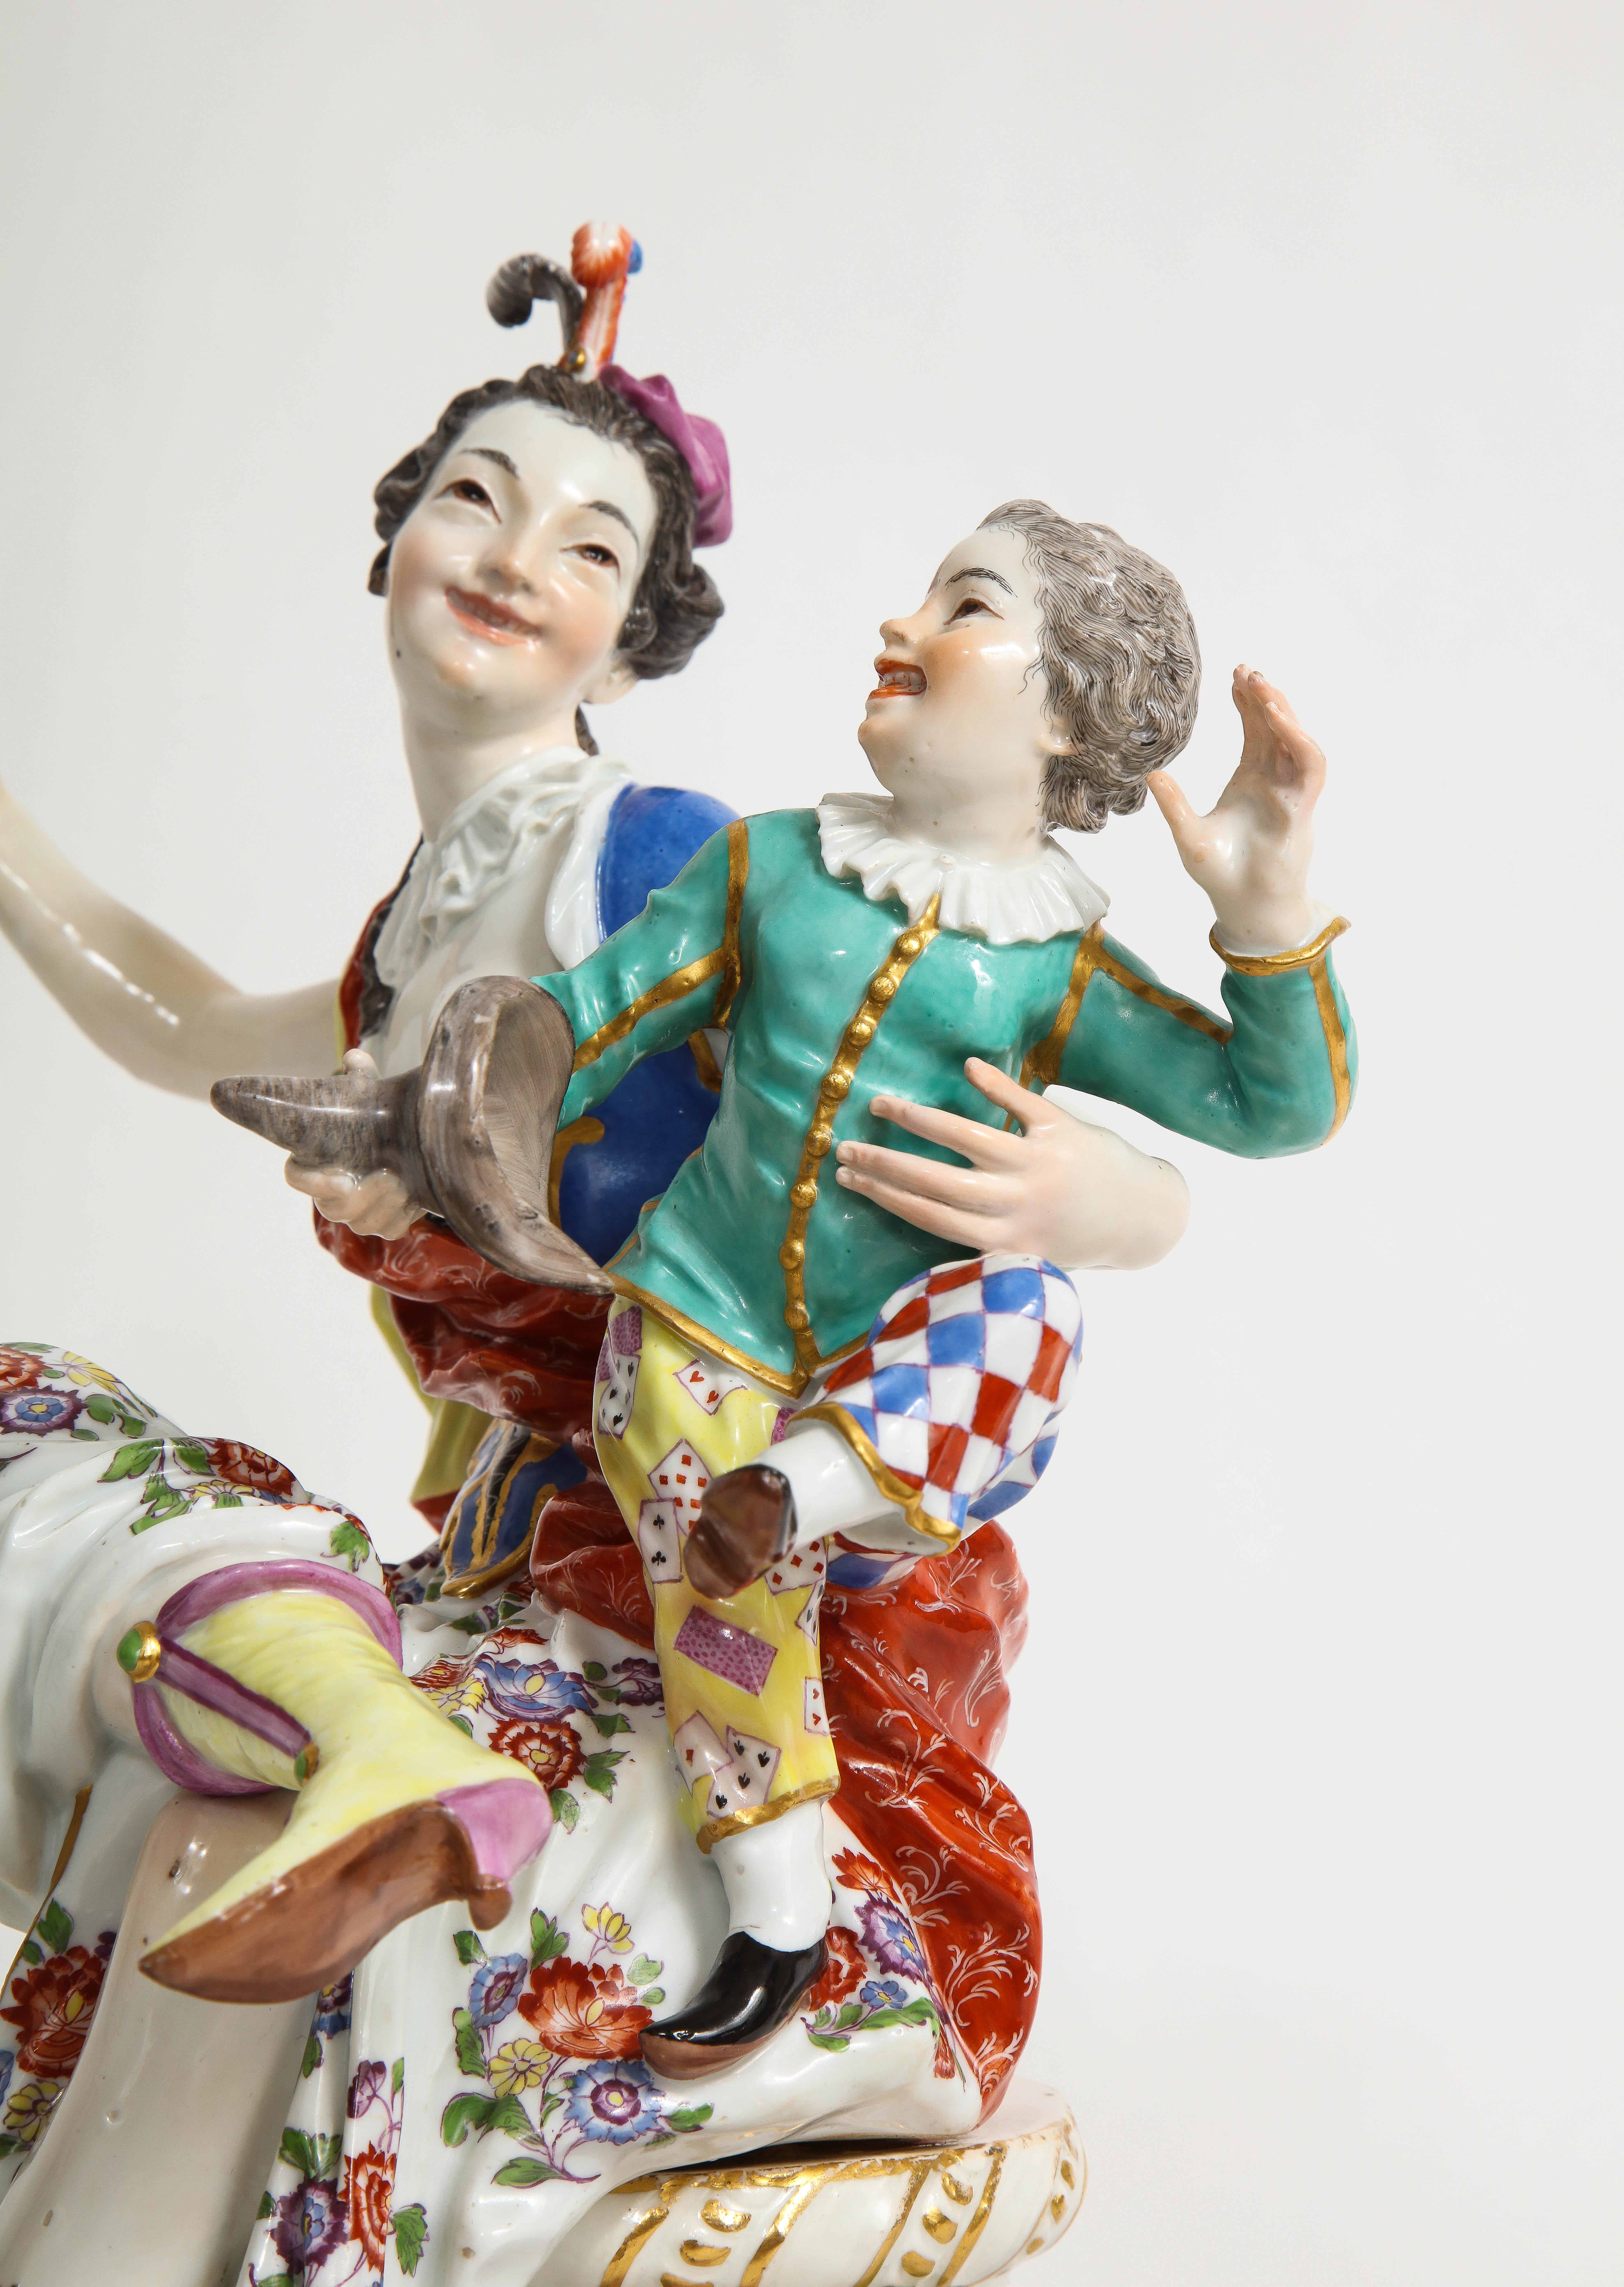 Rare 18th Century Meissen Porcelain Group of a Thalia with a Harlequin Child For Sale 1